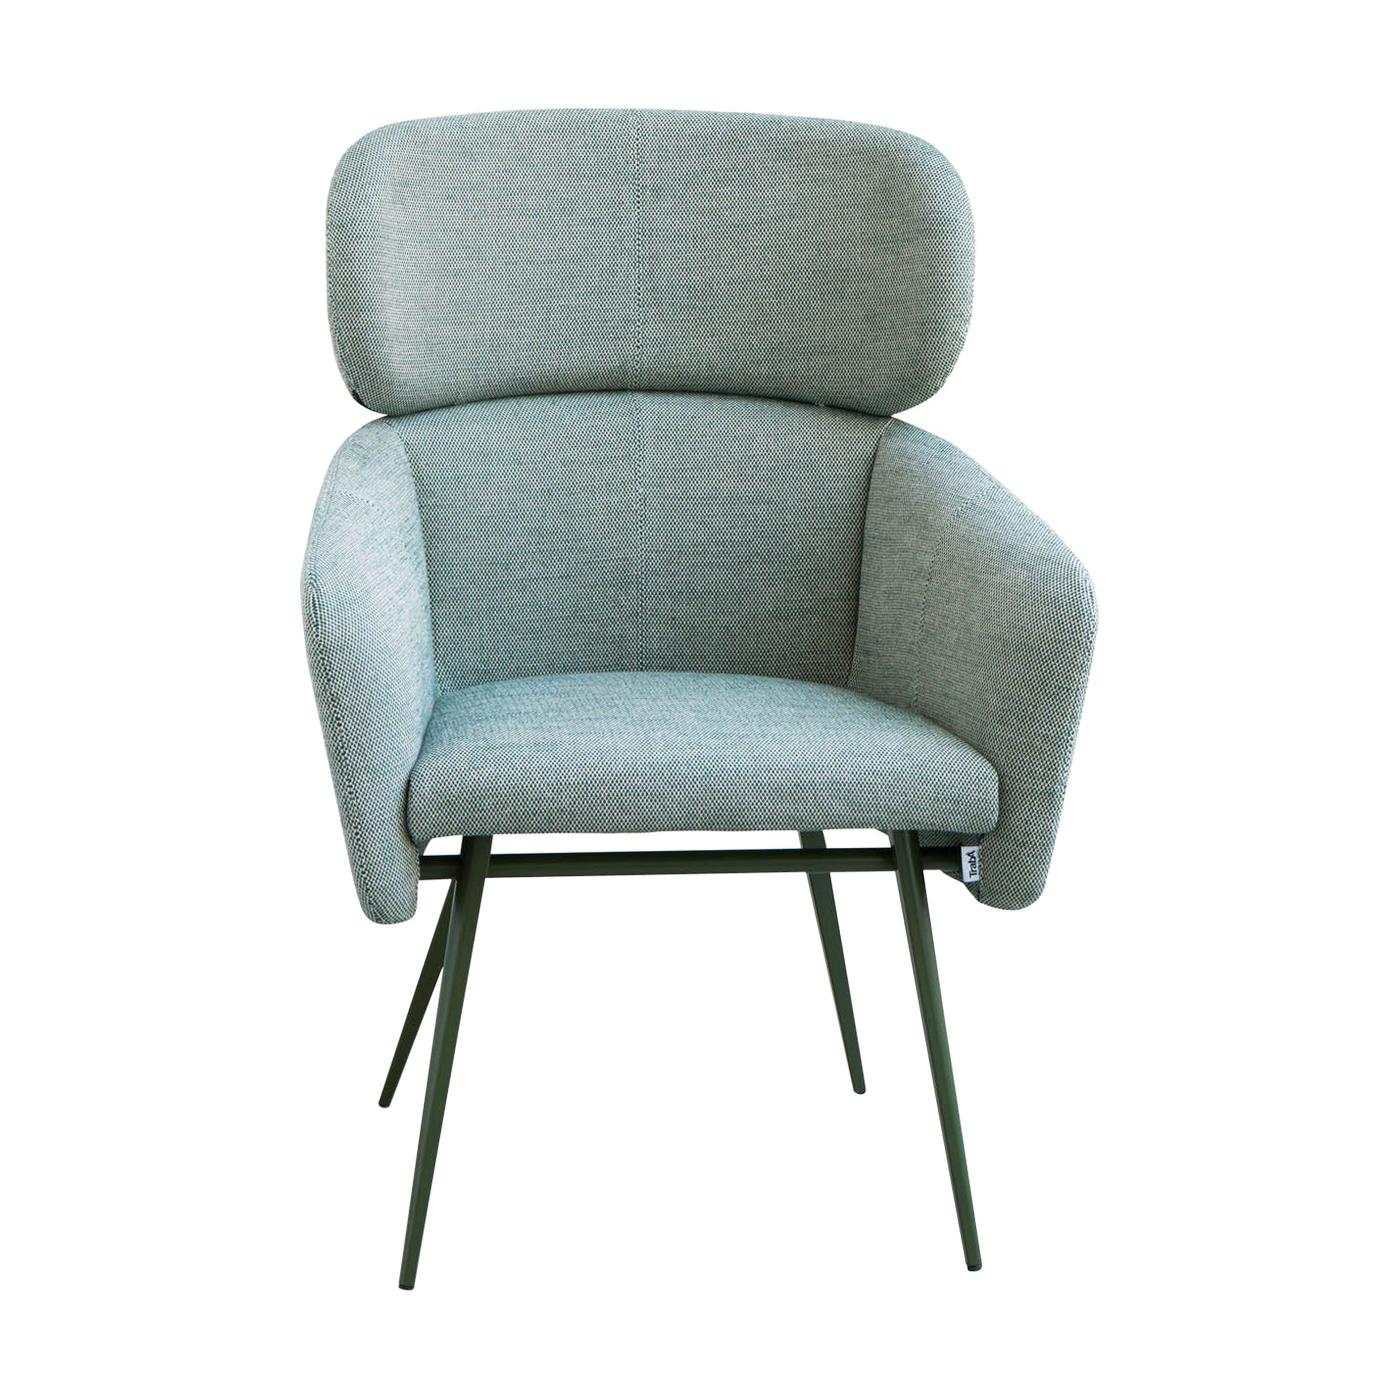 Balù Extra Large Met Light Blue Chair by Emilio Nanni For Sale